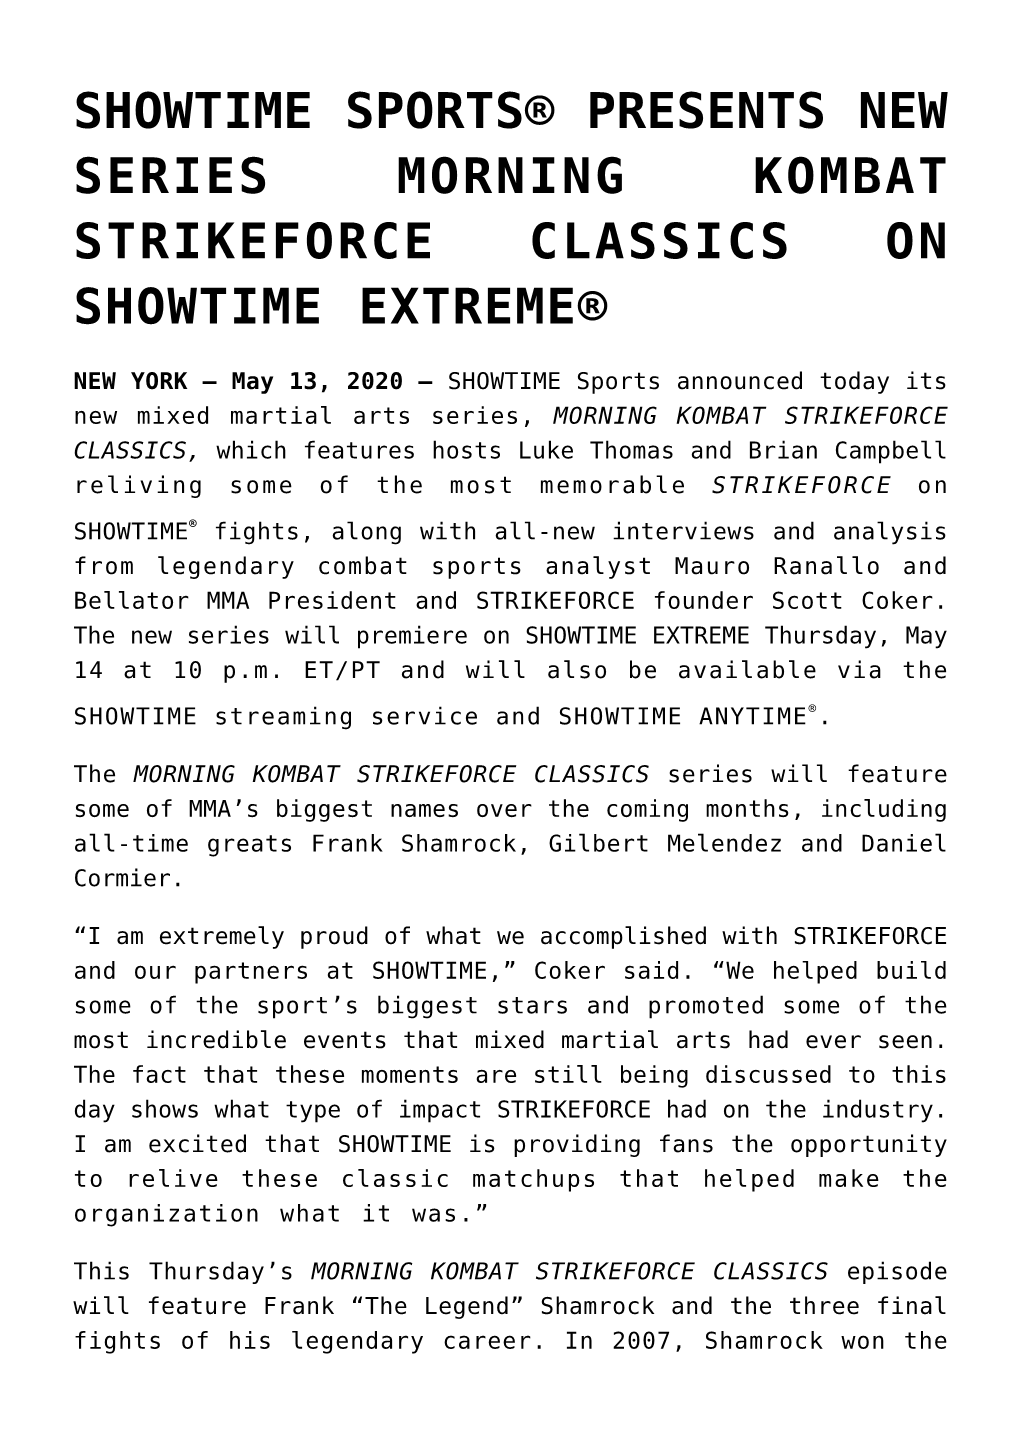 Showtime Sports® Presents New Series Morning Kombat Strikeforce Classics on Showtime Extreme®